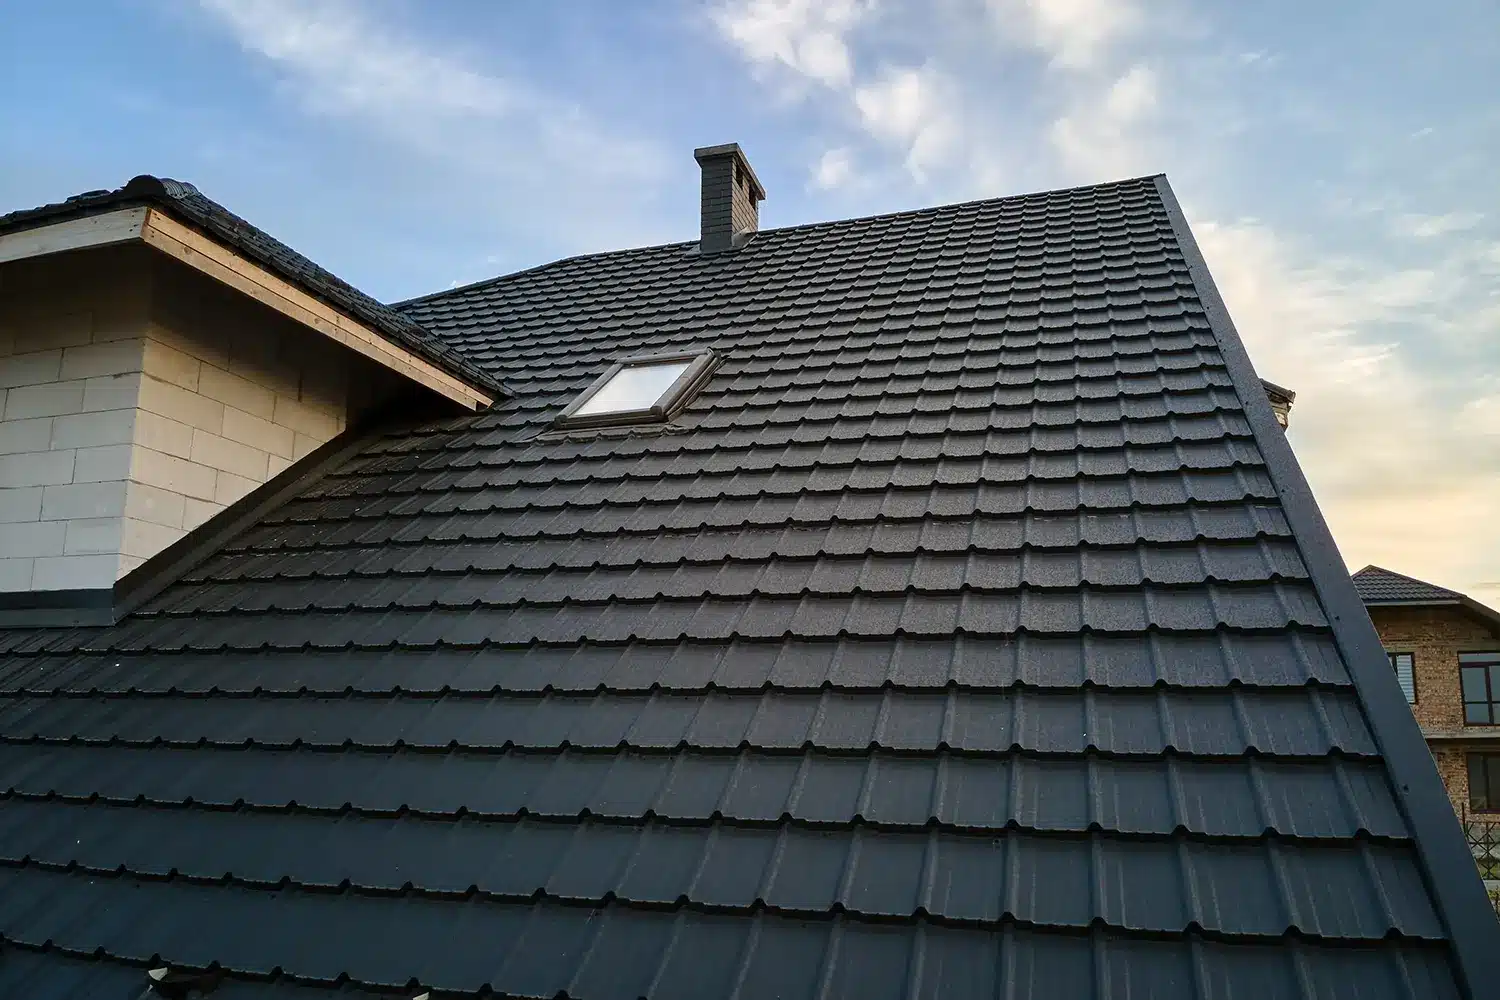 residential roof types - 4